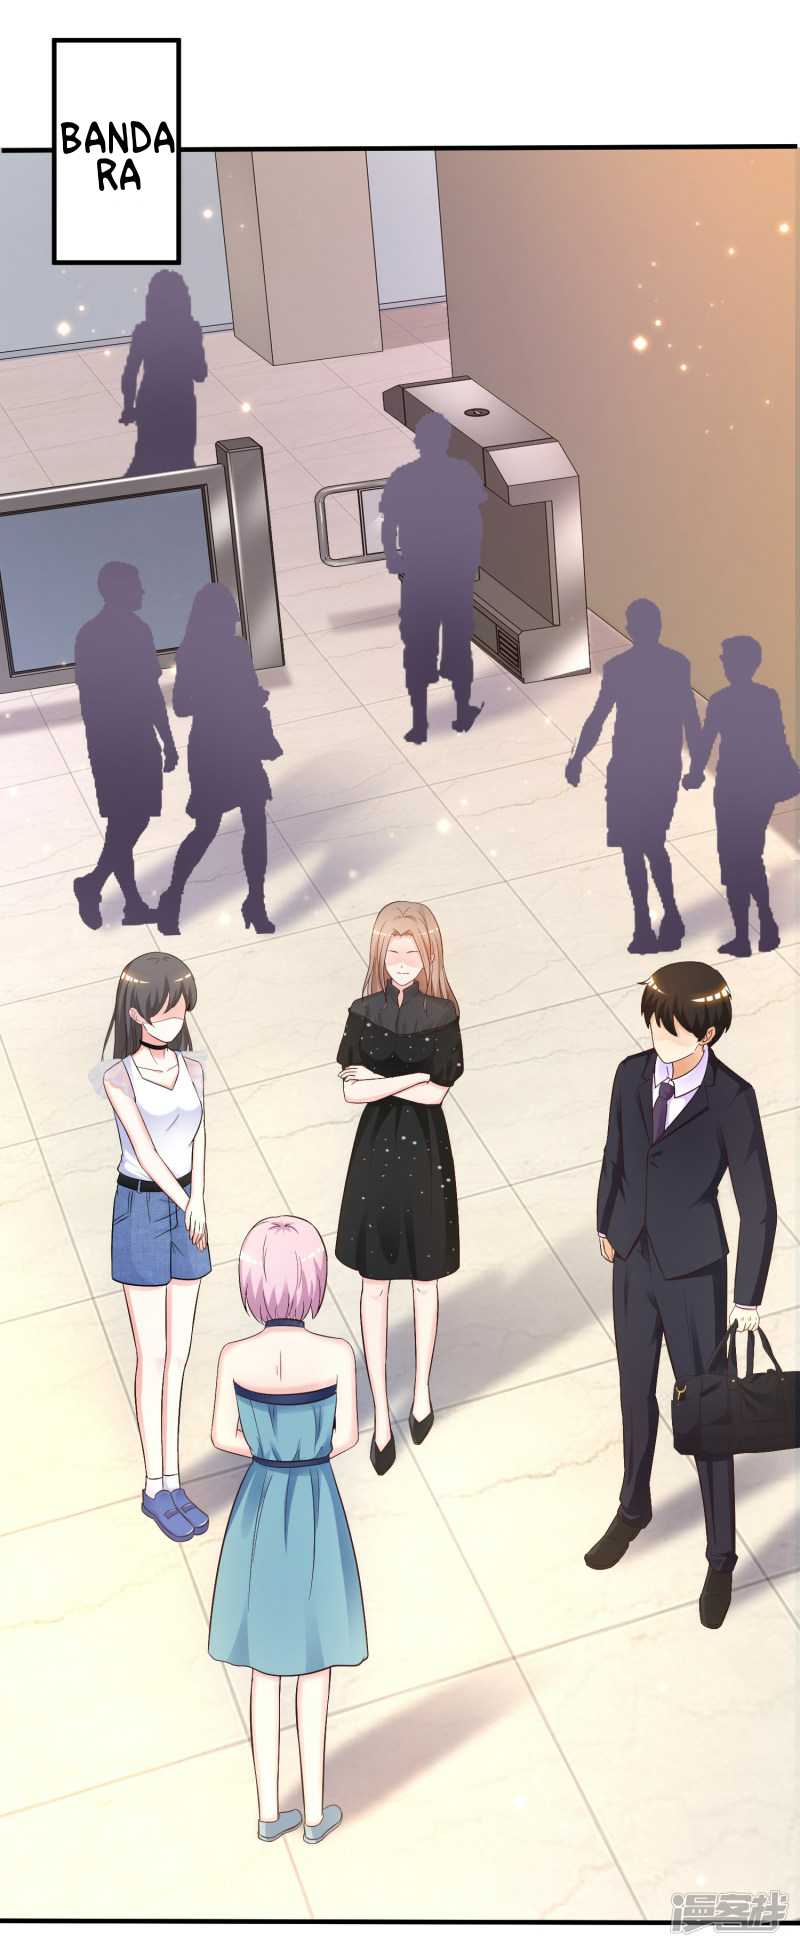 The Strongest Peach Blossom Chapter 70